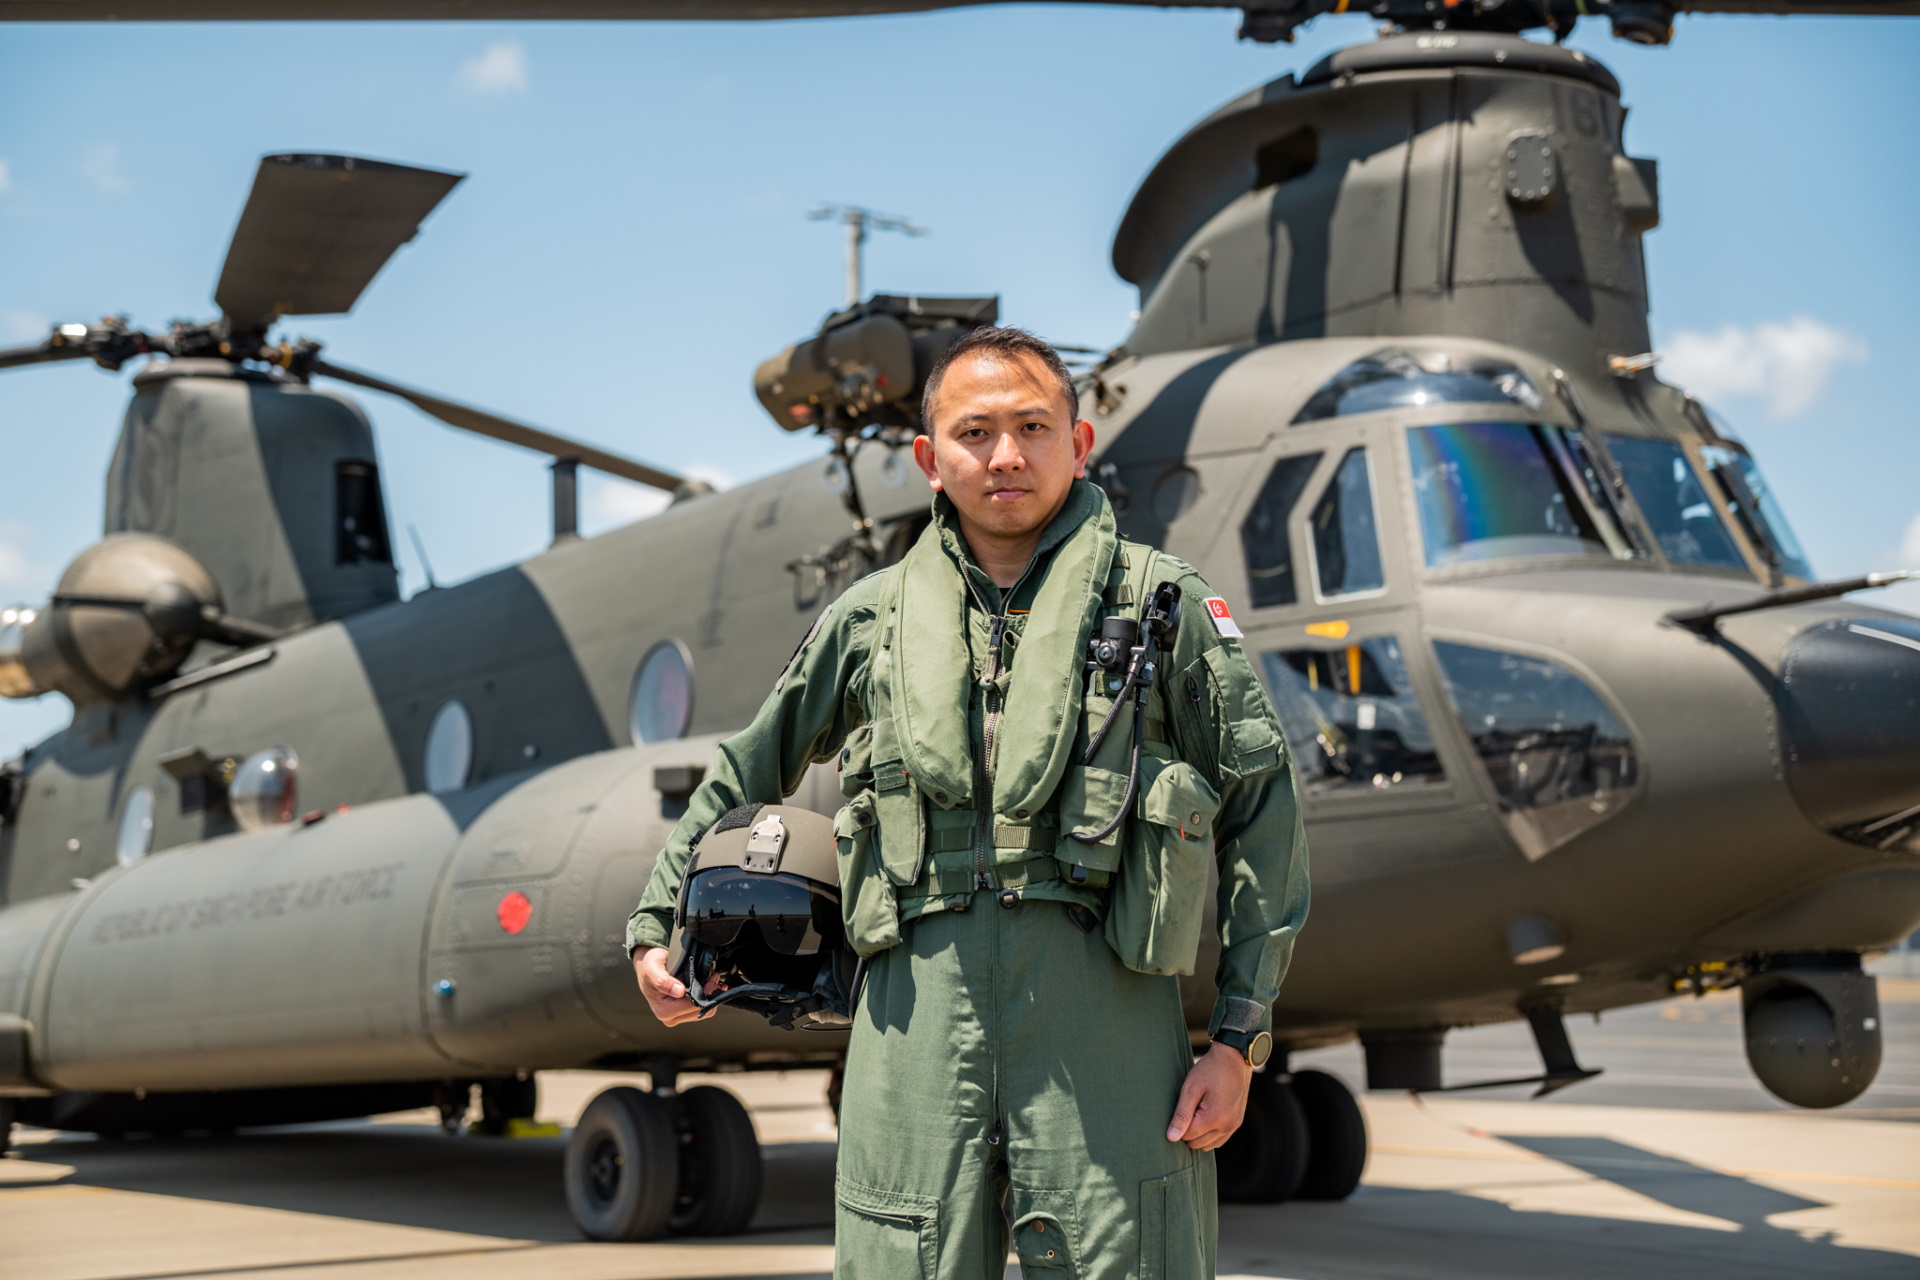 Q&A with Chinook pilot at Ex Wallaby 2021